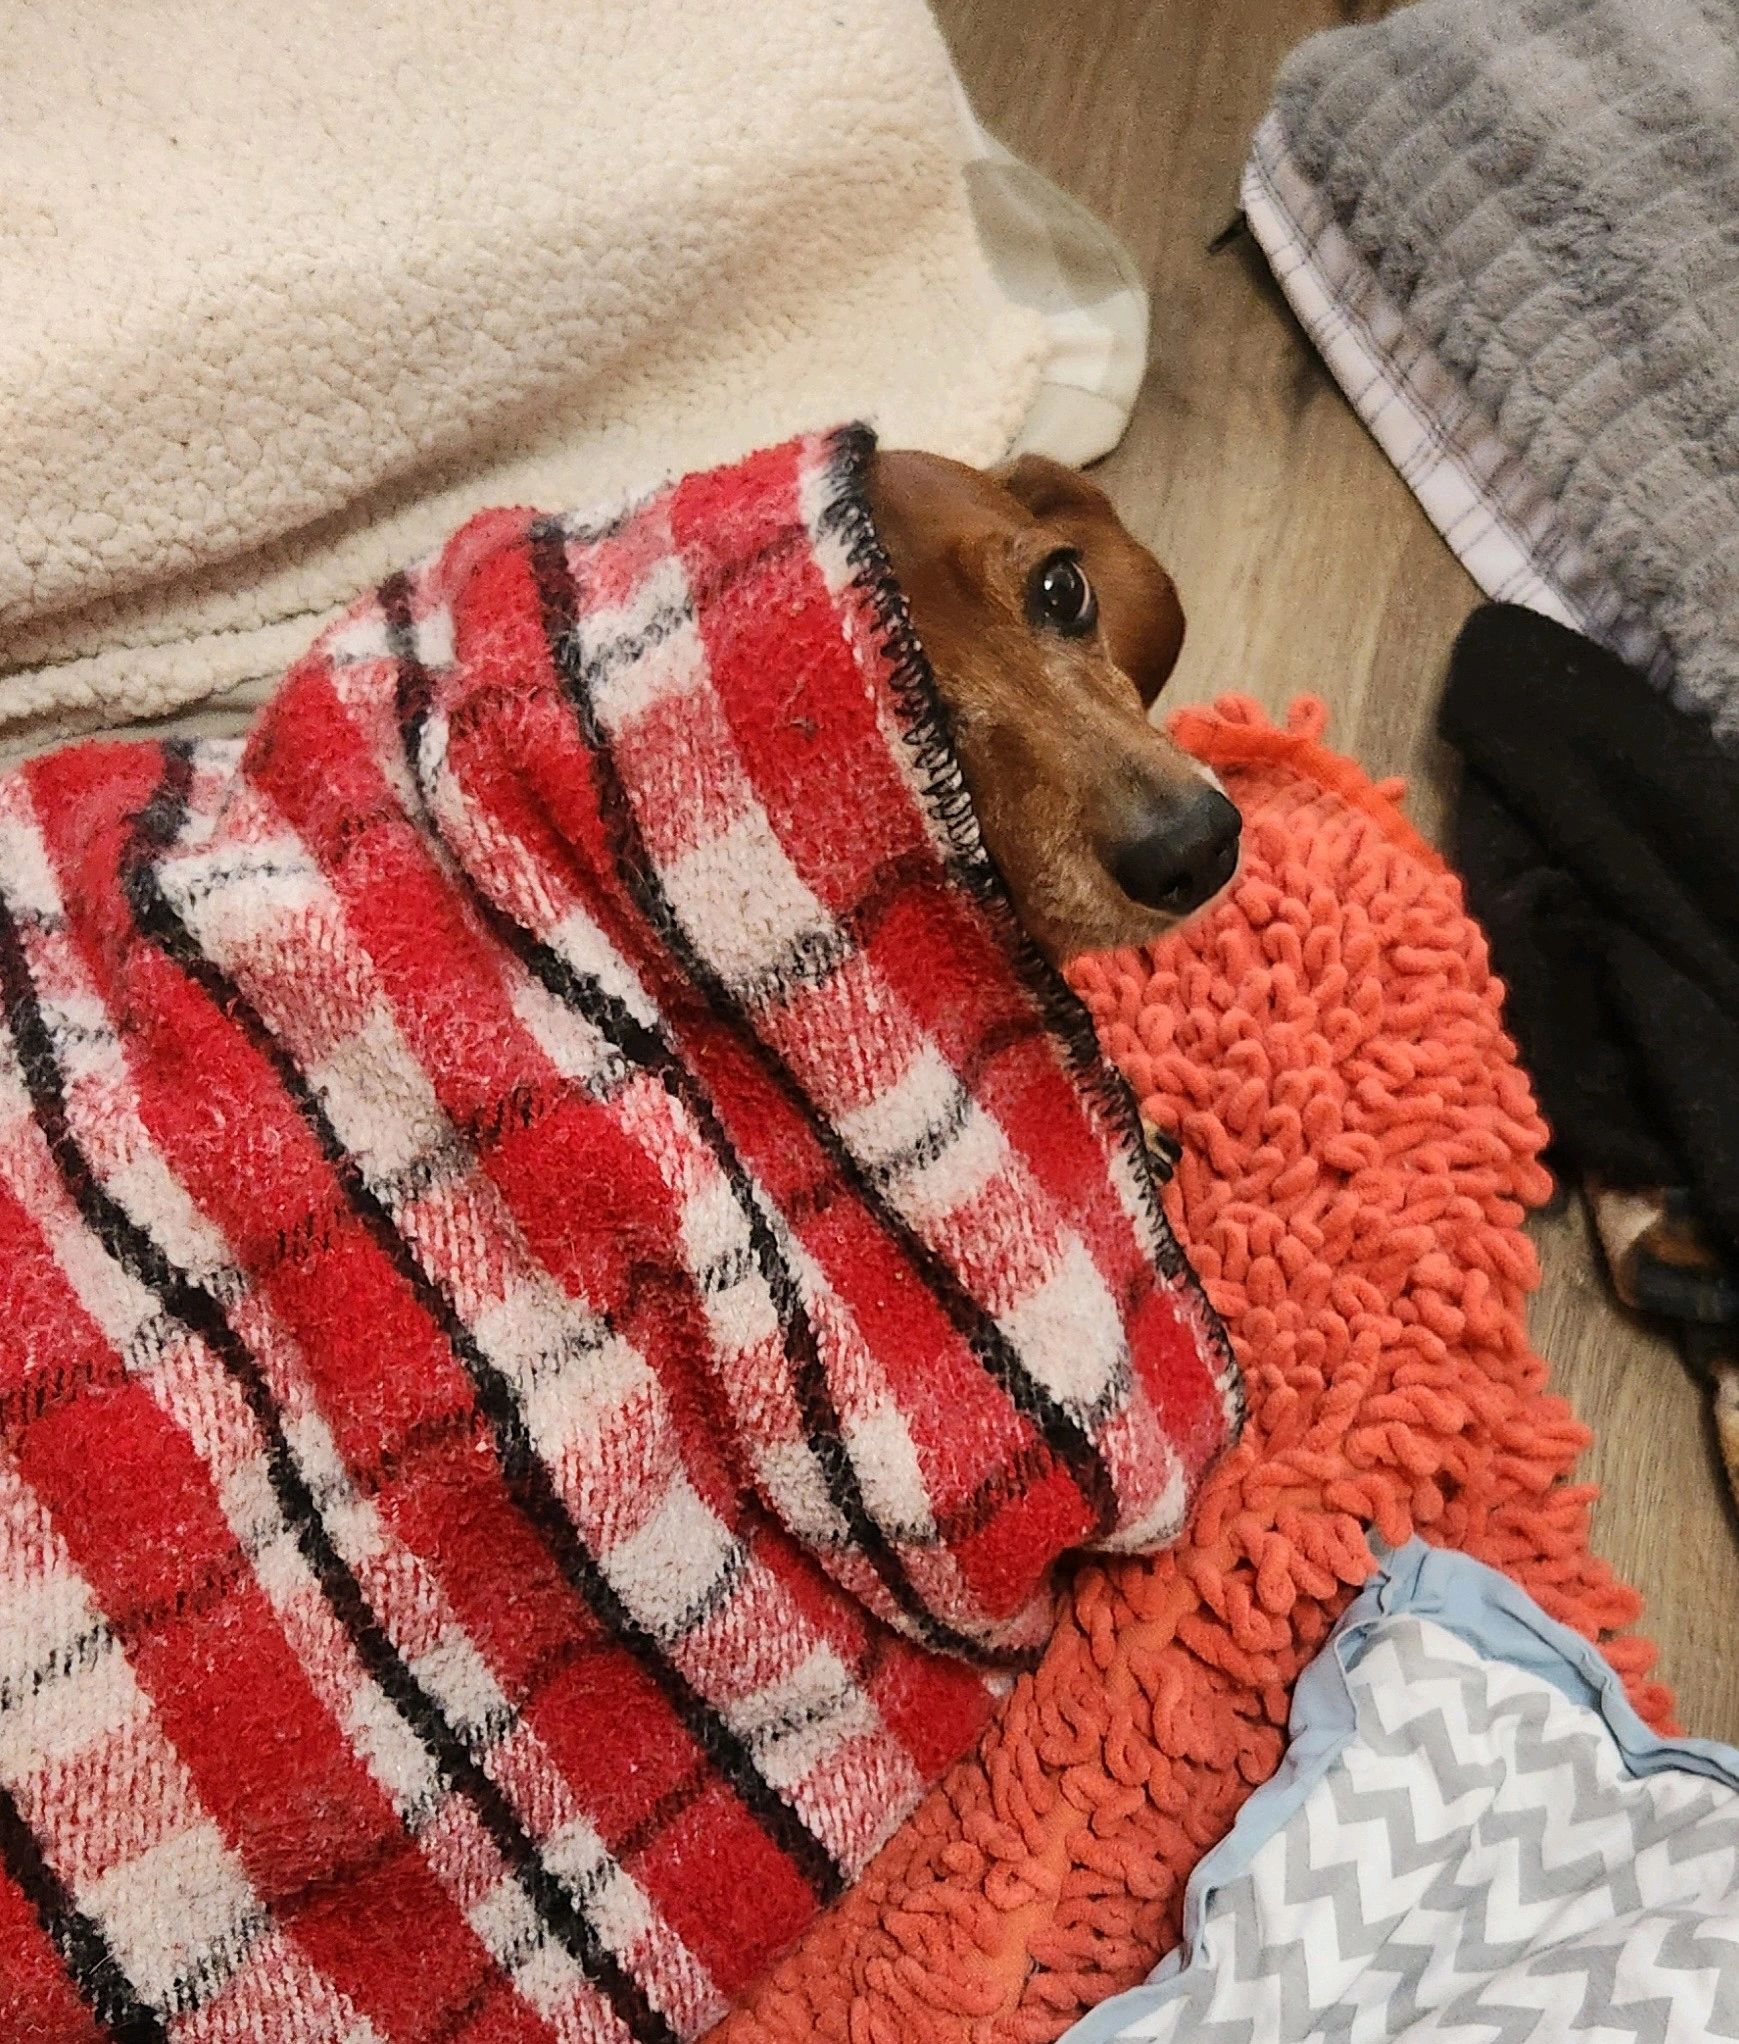 A daschund peeking out from his blanky